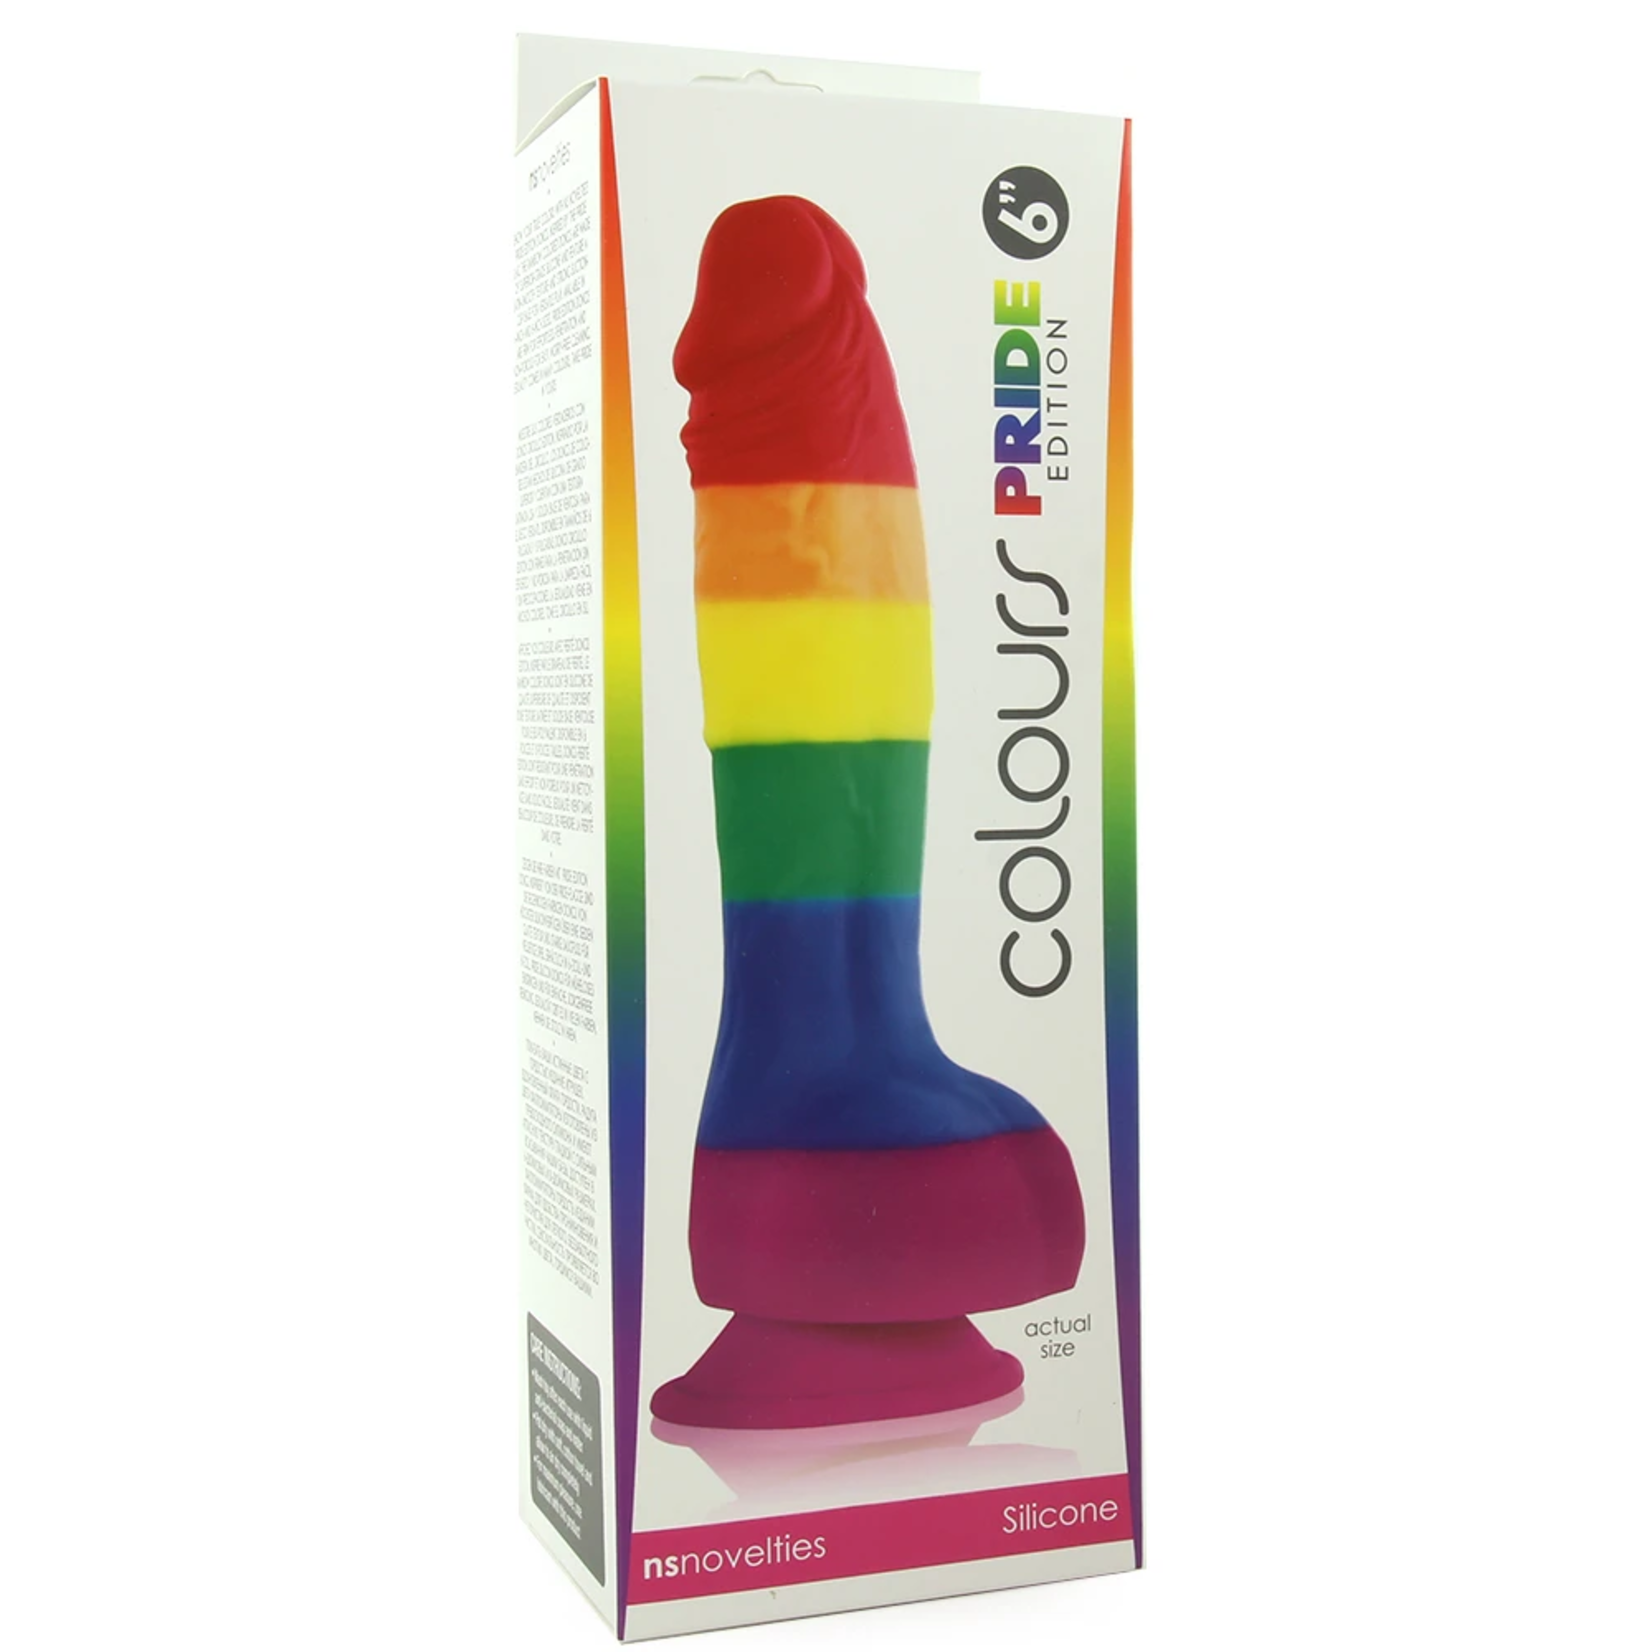 NSNOVELTIES COLOURS PRIDE EDITION 6 INCH SILICONE DILDO IN RAINBOW